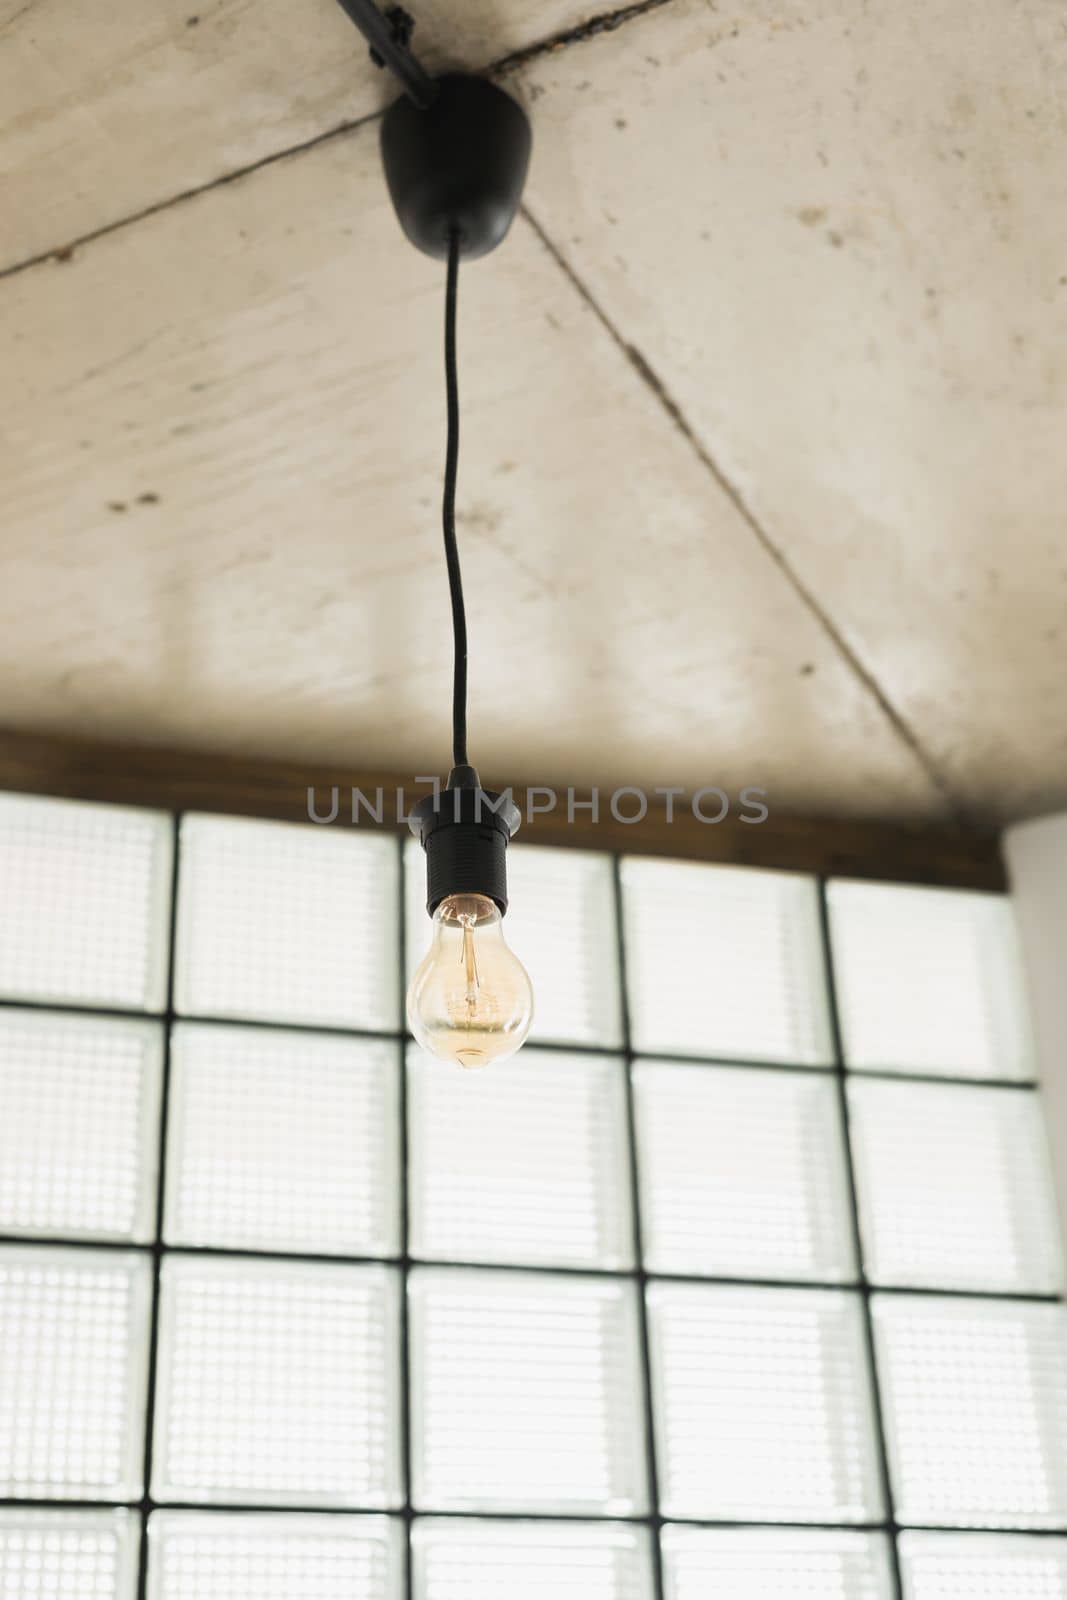 vintage light bulb hanging from ceiling in living room by Satura86